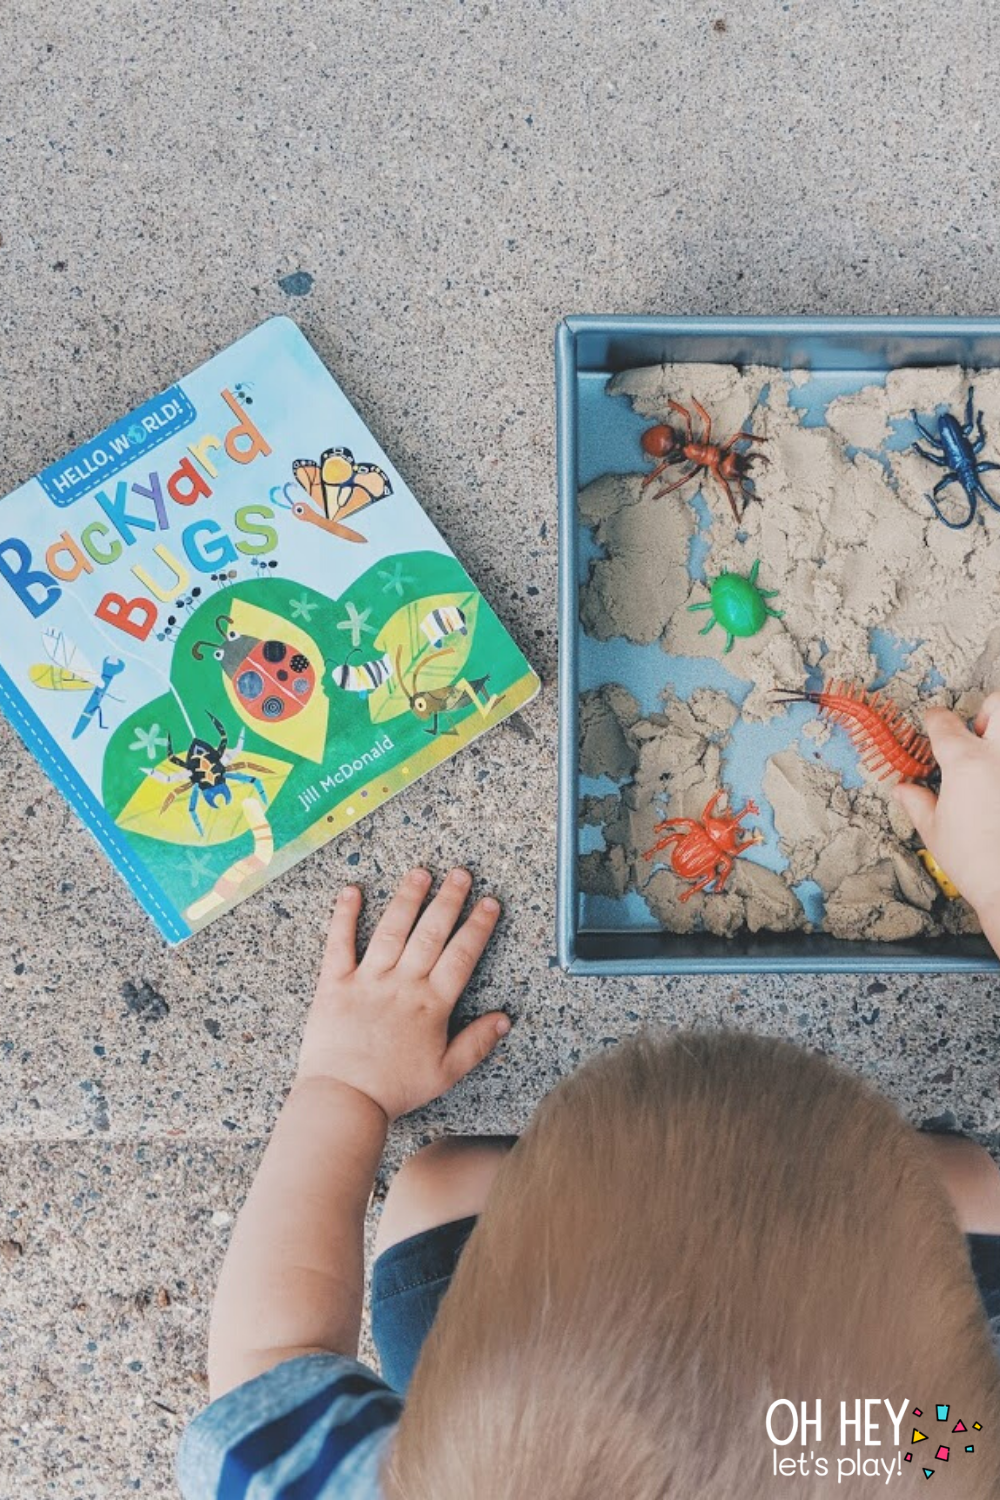 Bugs in Kinetic Sand 2 30+ Activities for 1-2 Year Old Toddlers - Oh Hey Let's Play www.ohheyletsplay.com.png